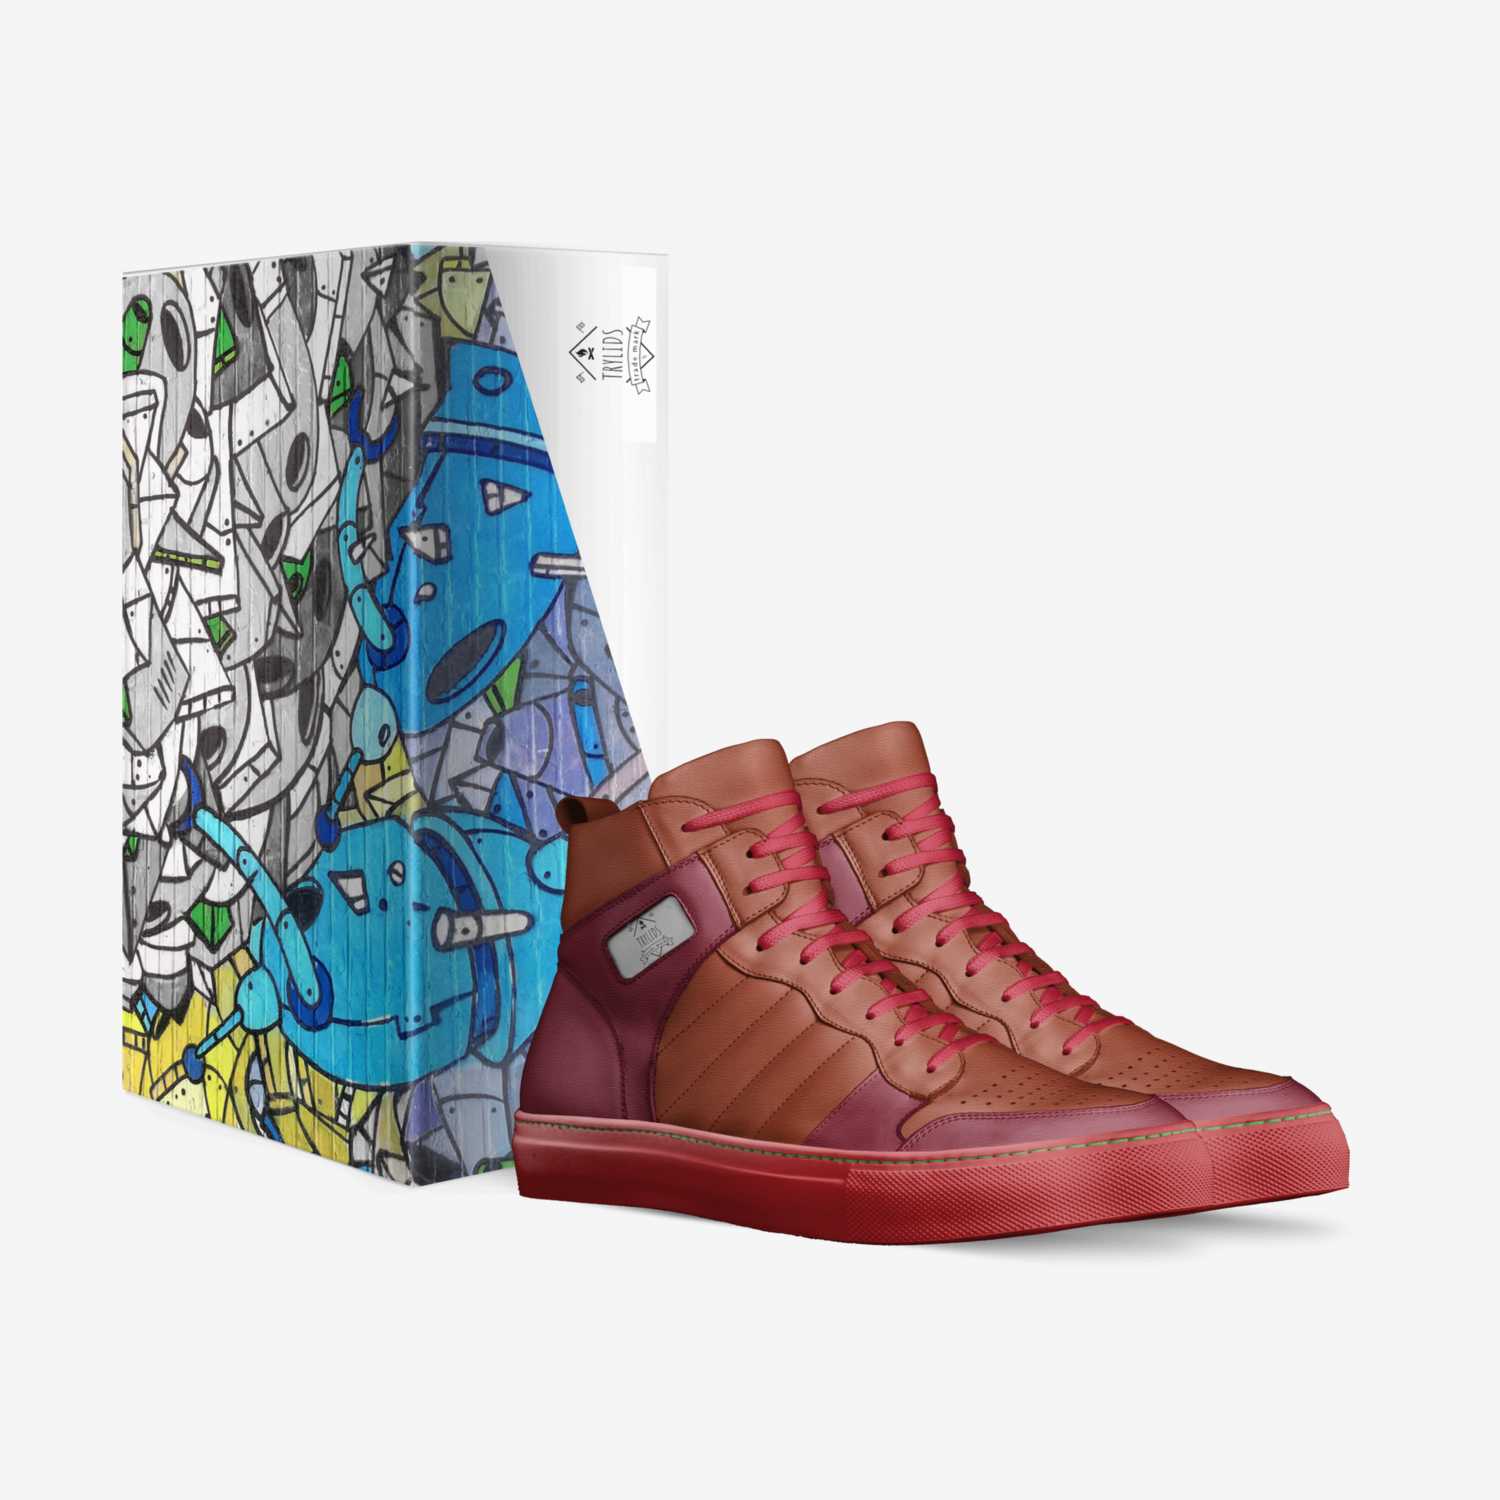 trylids custom made in Italy shoes by Reese Eugene Lee | Box view